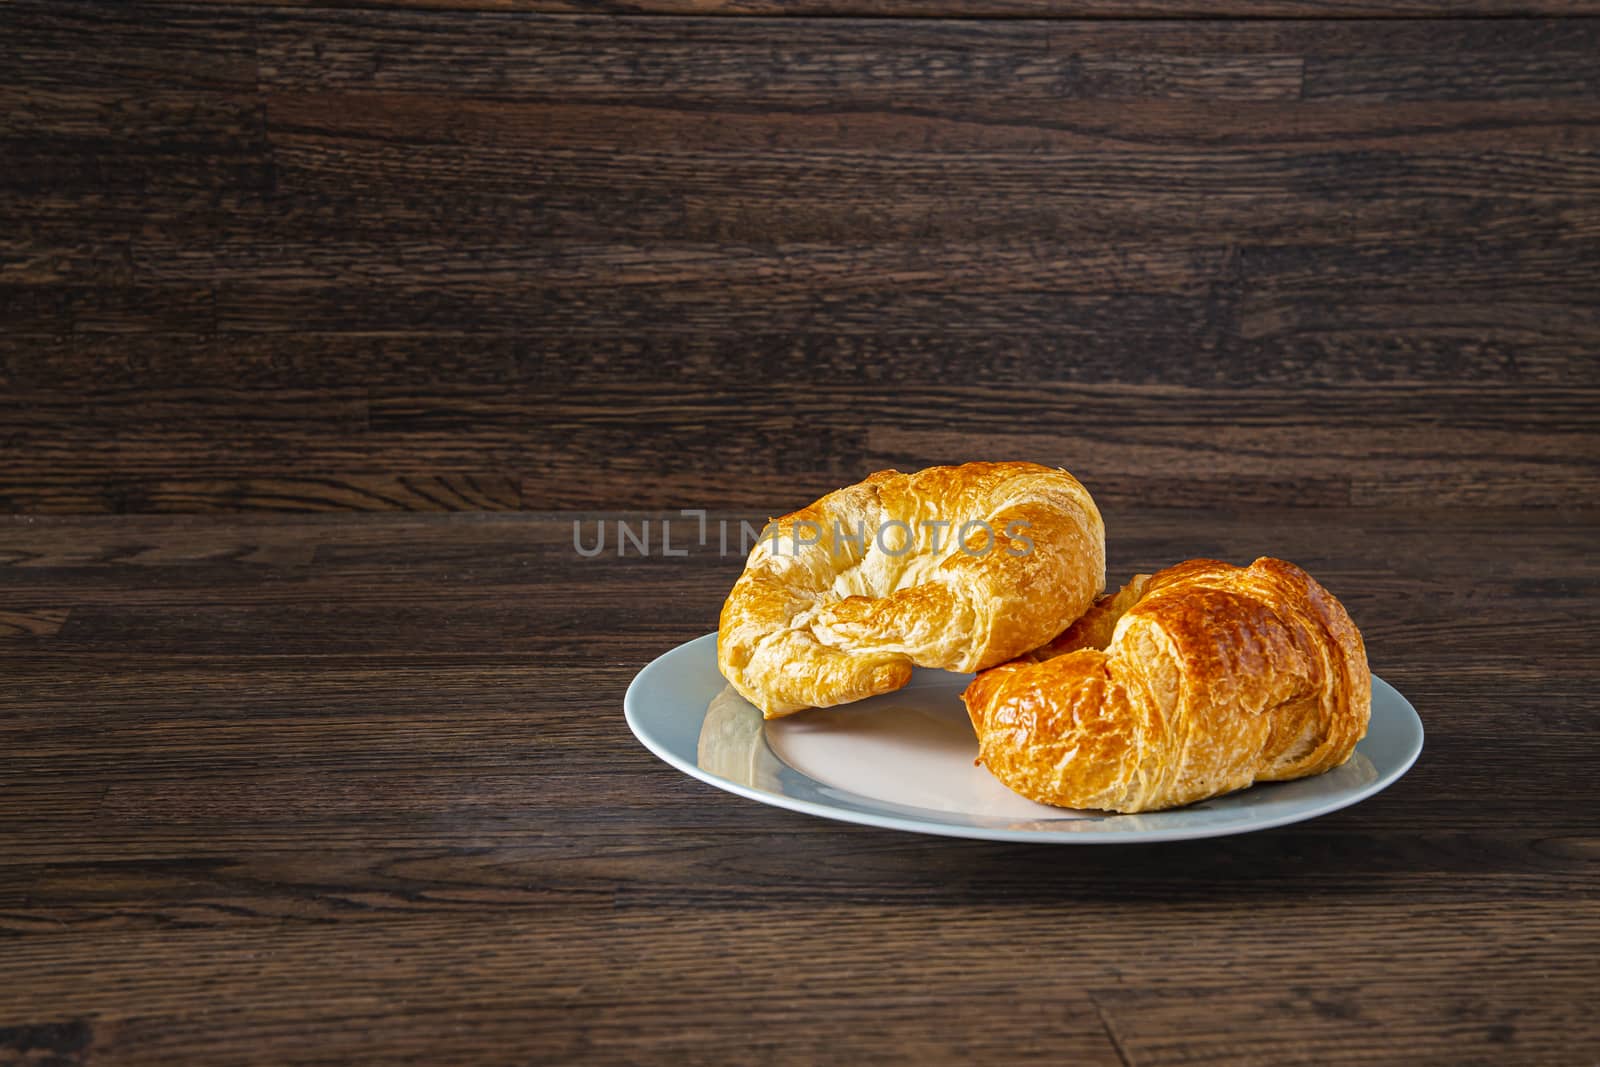 Plate of croissants by mypstudio